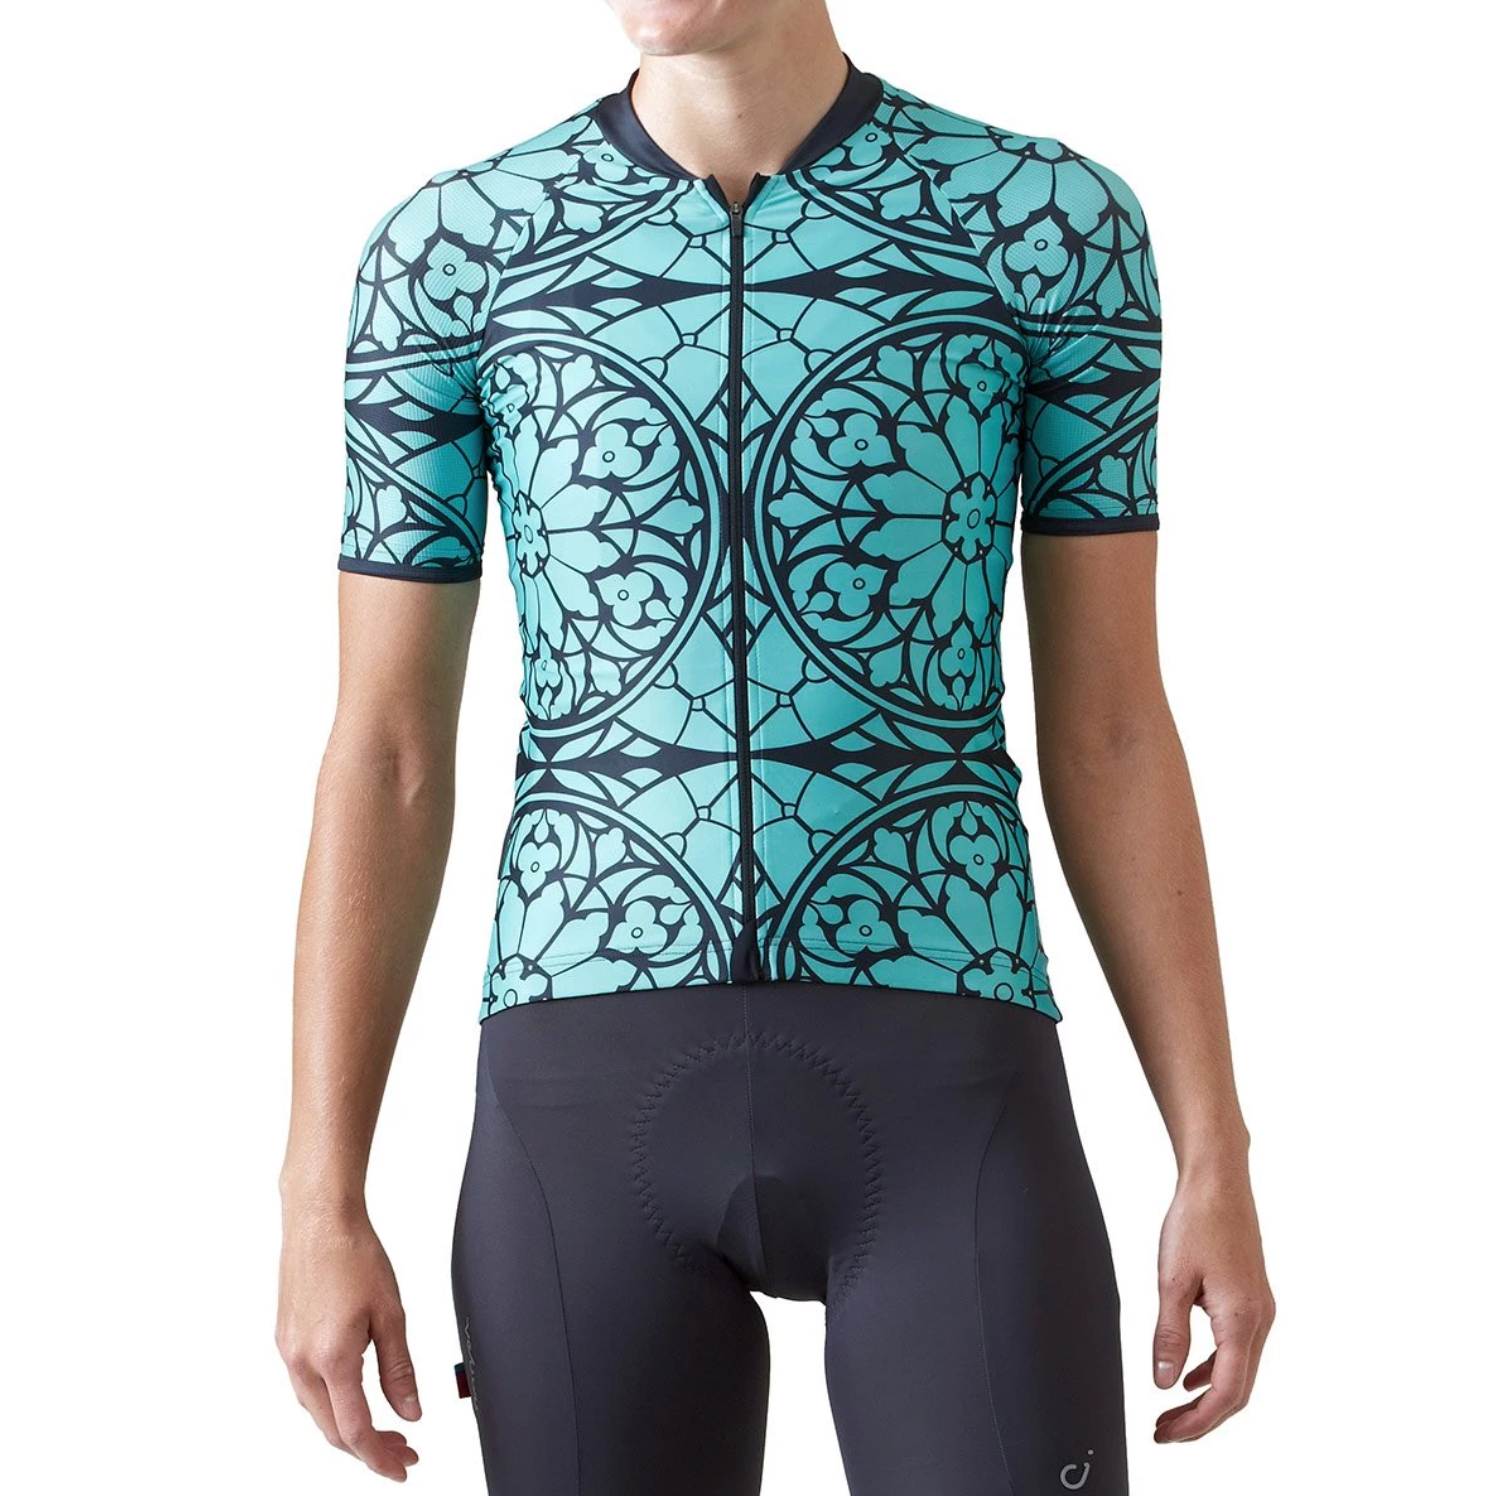 VELOCIO WOMENS JERSEY ES STAINED GLASS - 3 COLOURS TO CHOOSE CYCLING SYDNEY AUSTRALIA BIKE SHOP